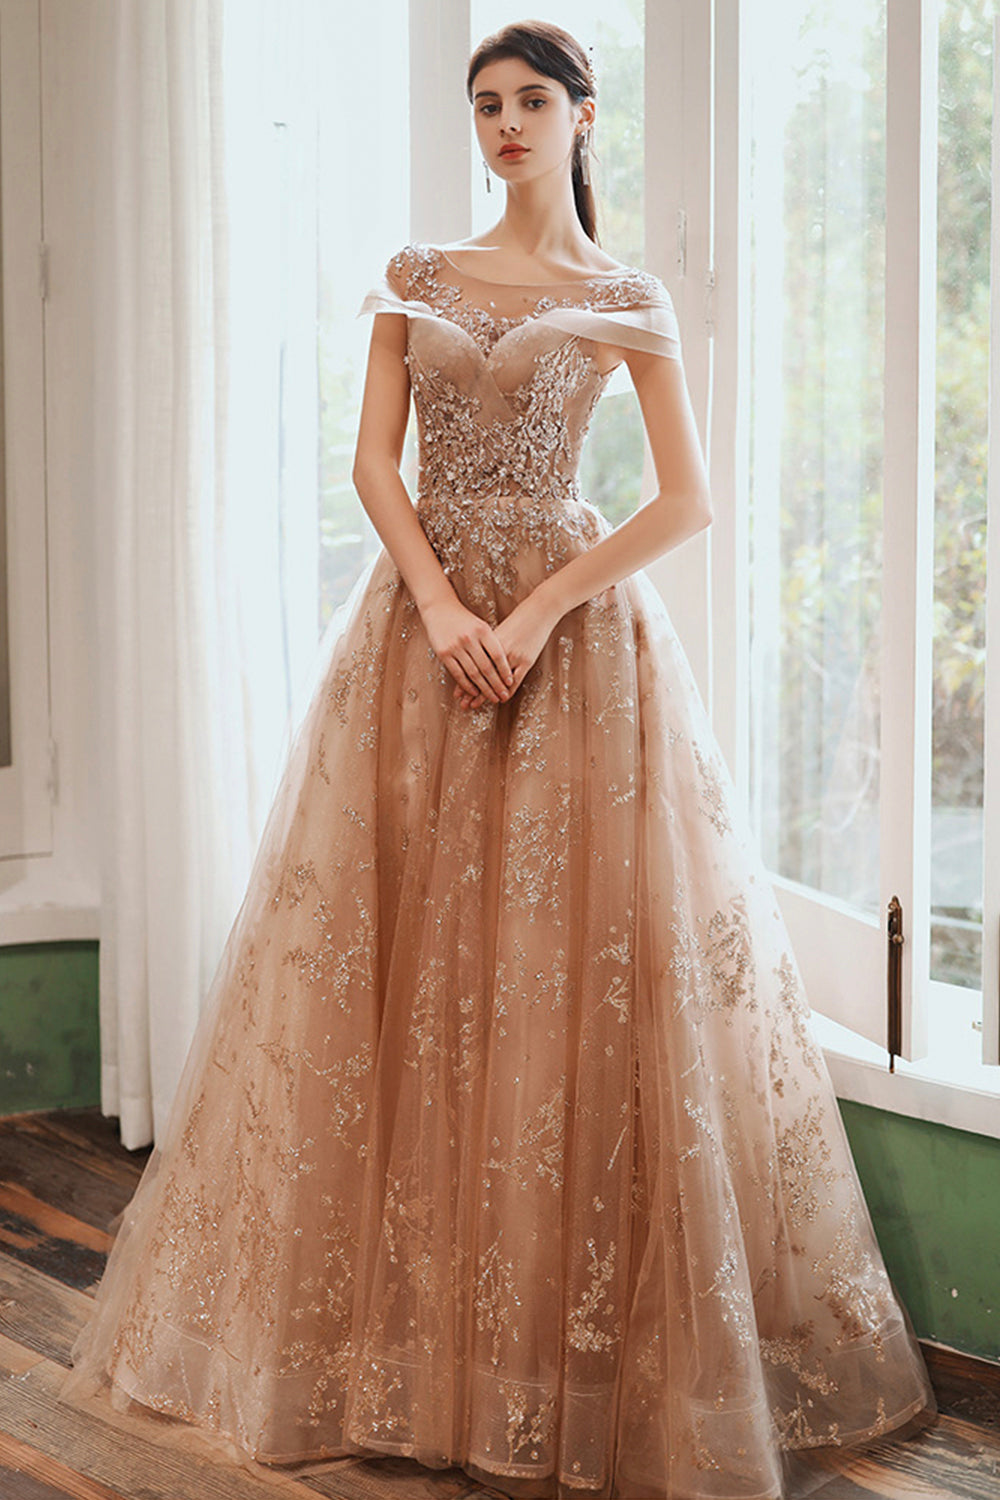 Beautiful Tulle Sequins Long Prom Dress, A-Line Evening Dress